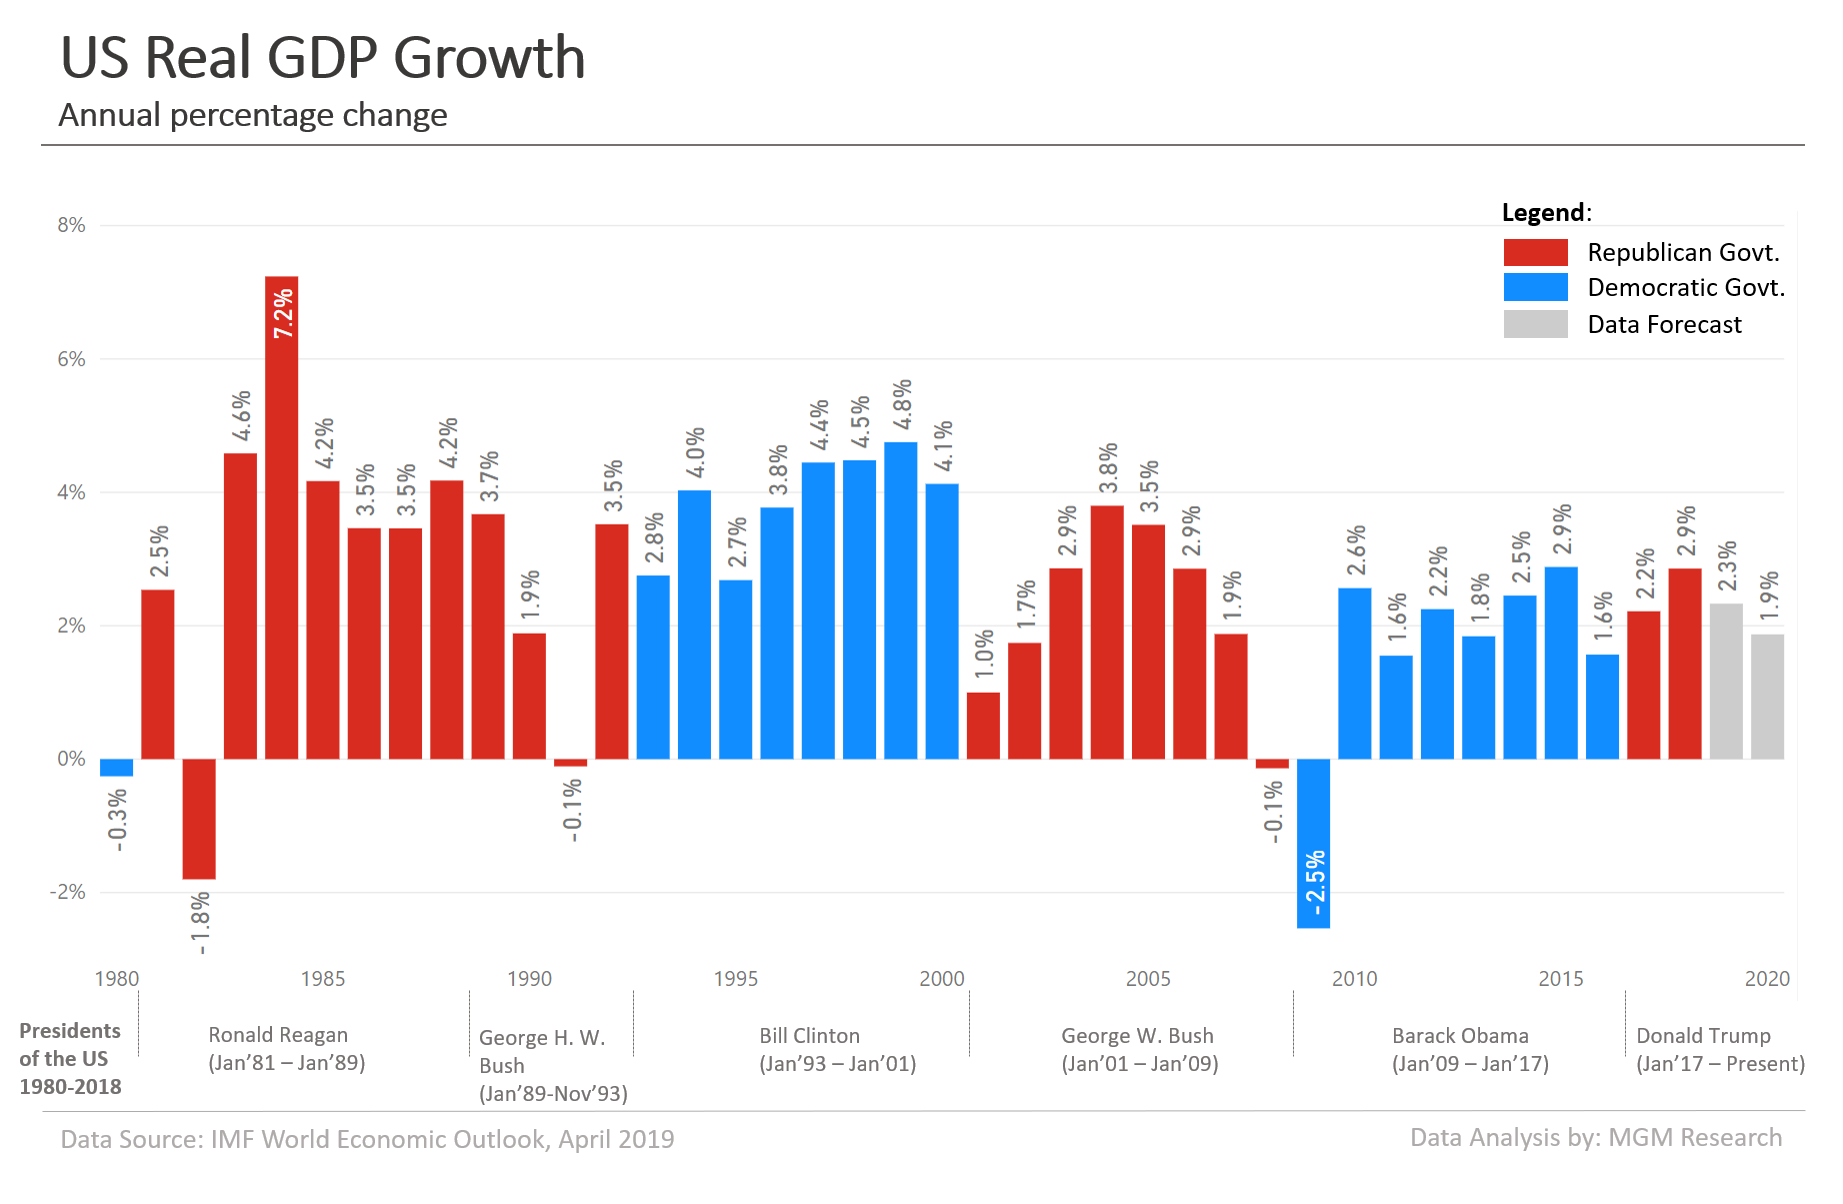 US GDP Data and Charts 1980-2020 - MGM Research